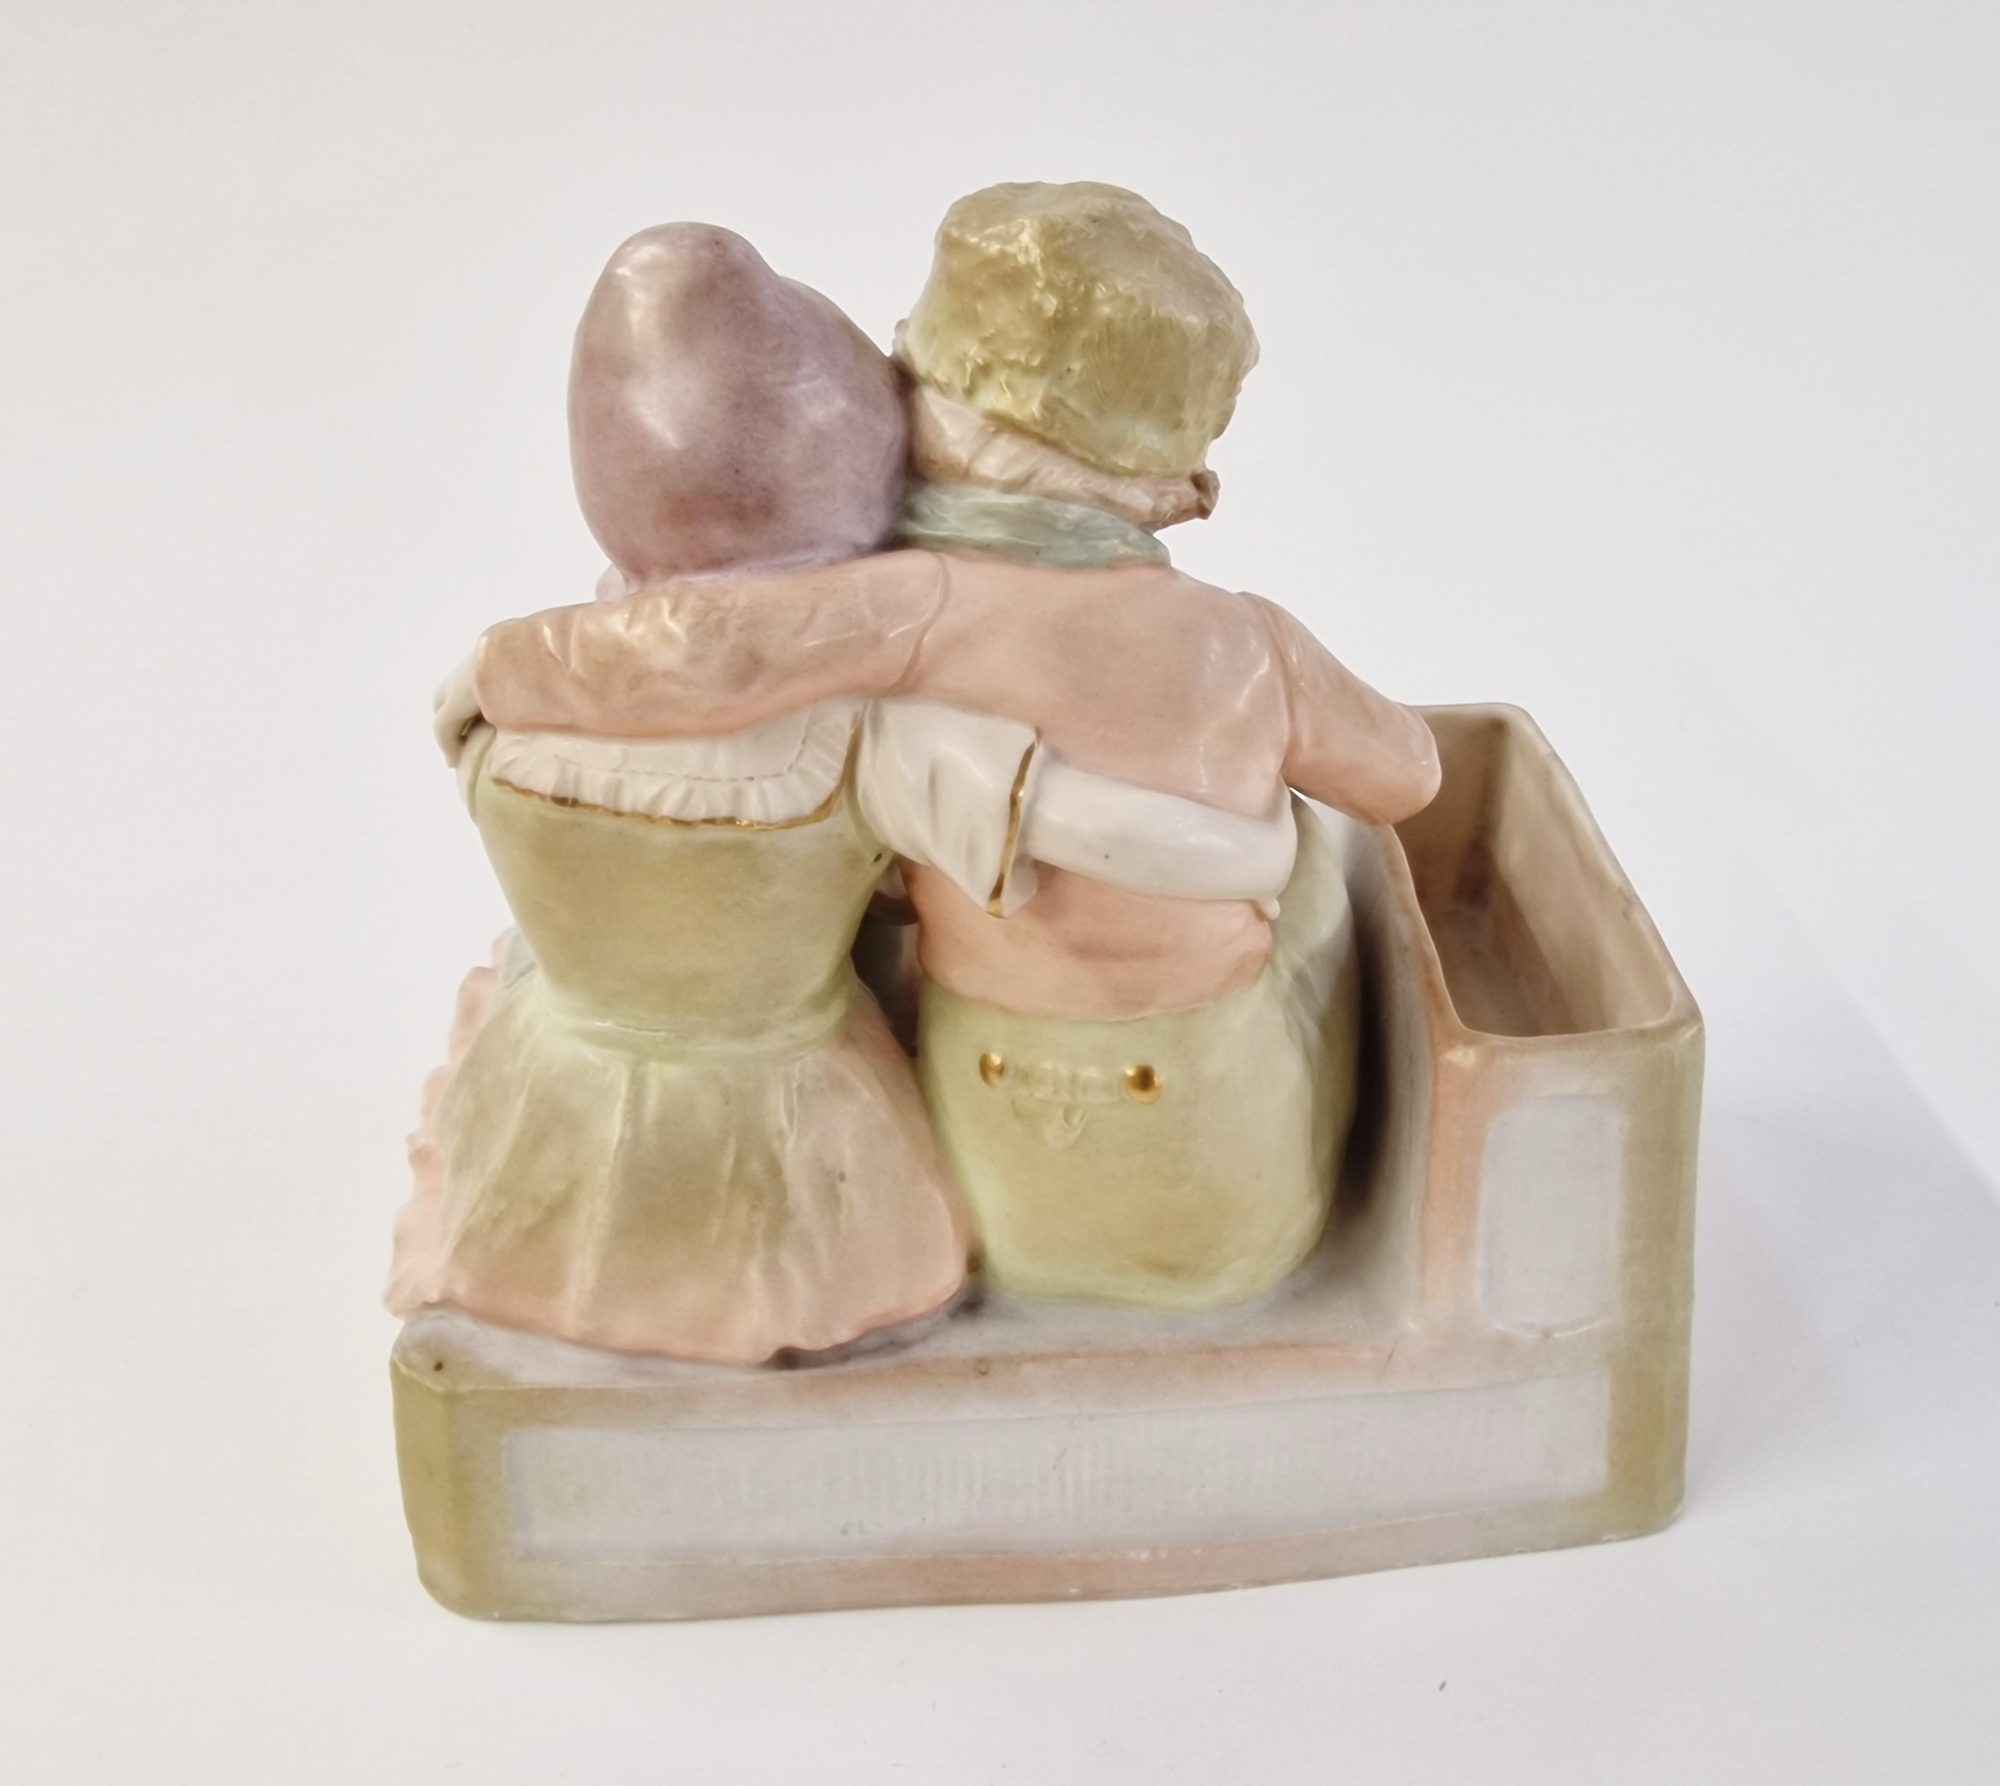 Early 20th century Vienna (Amphora) ceramic figure group of two Dutch-style children embracing, - Image 3 of 6